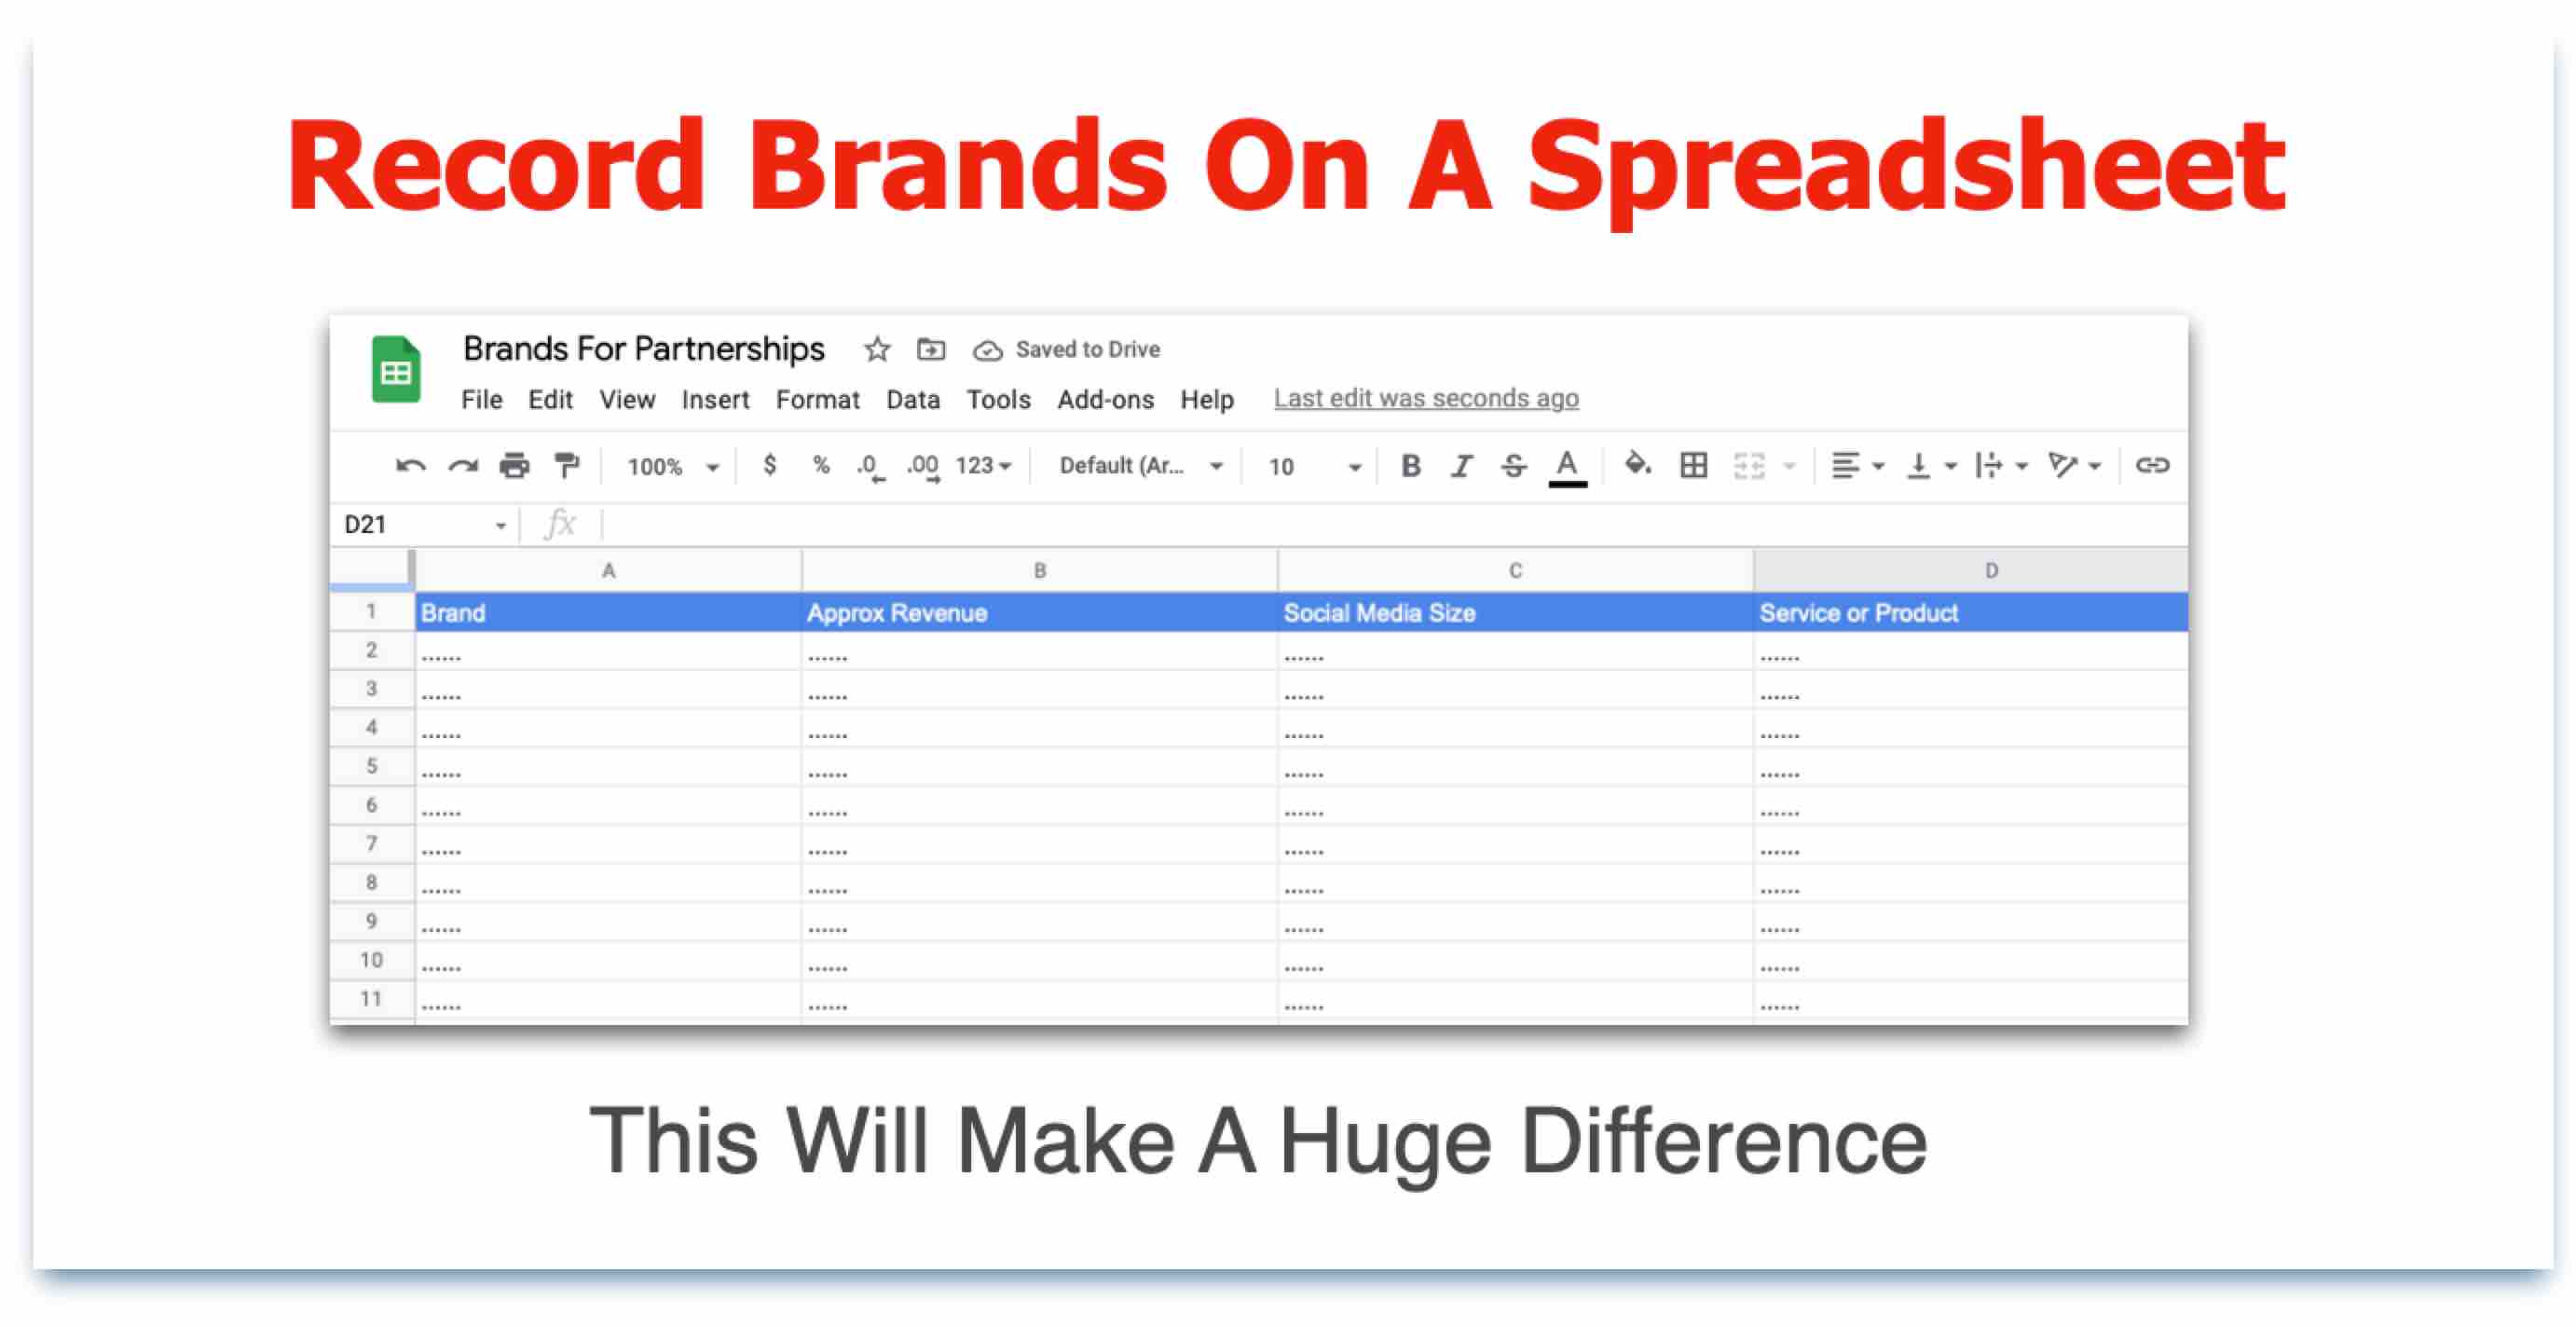 Record brands on a spreadsheet to get a brand deal